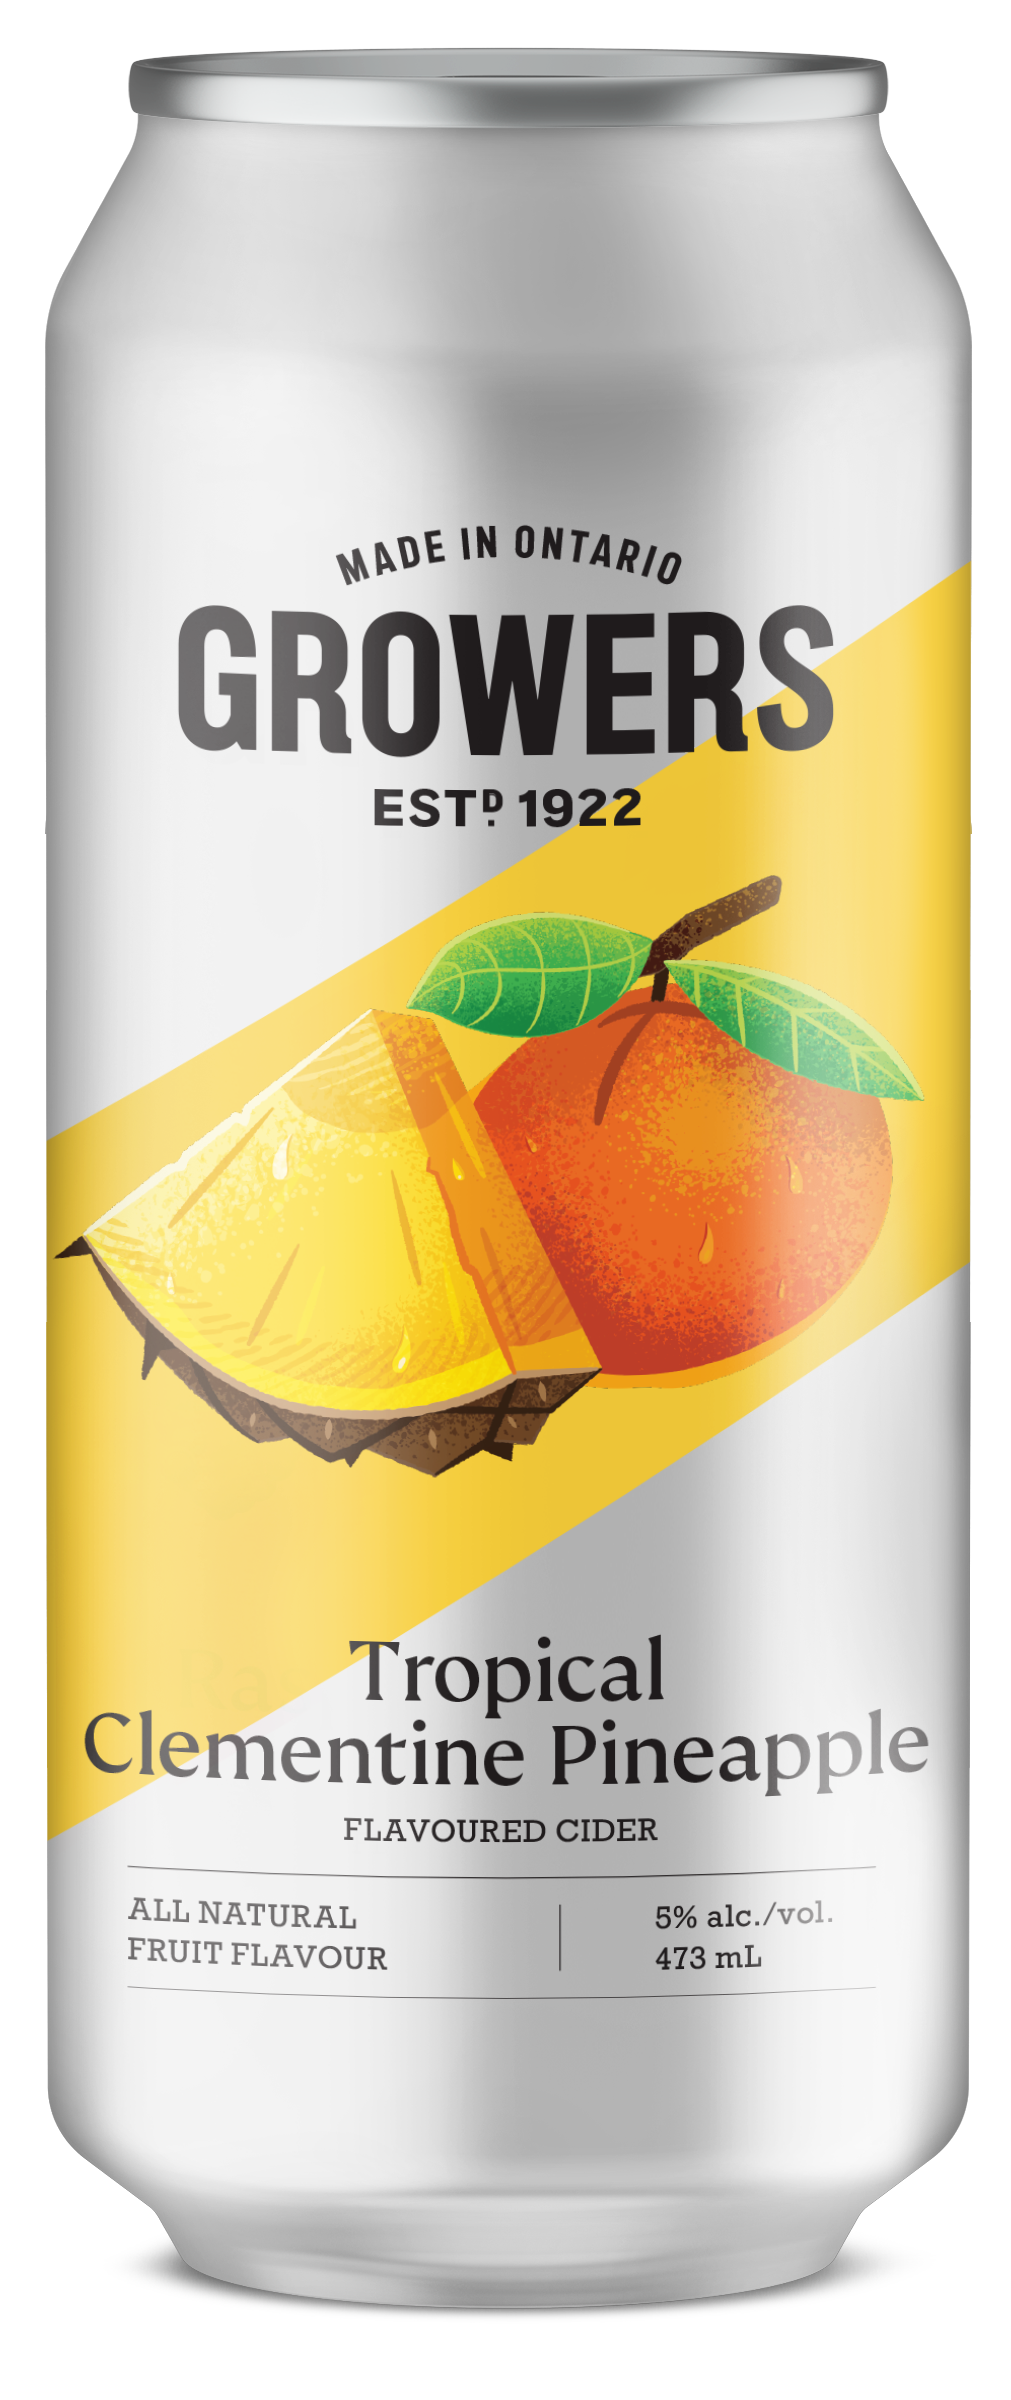 Can of Growers Tropical Clementine Pineapple cider